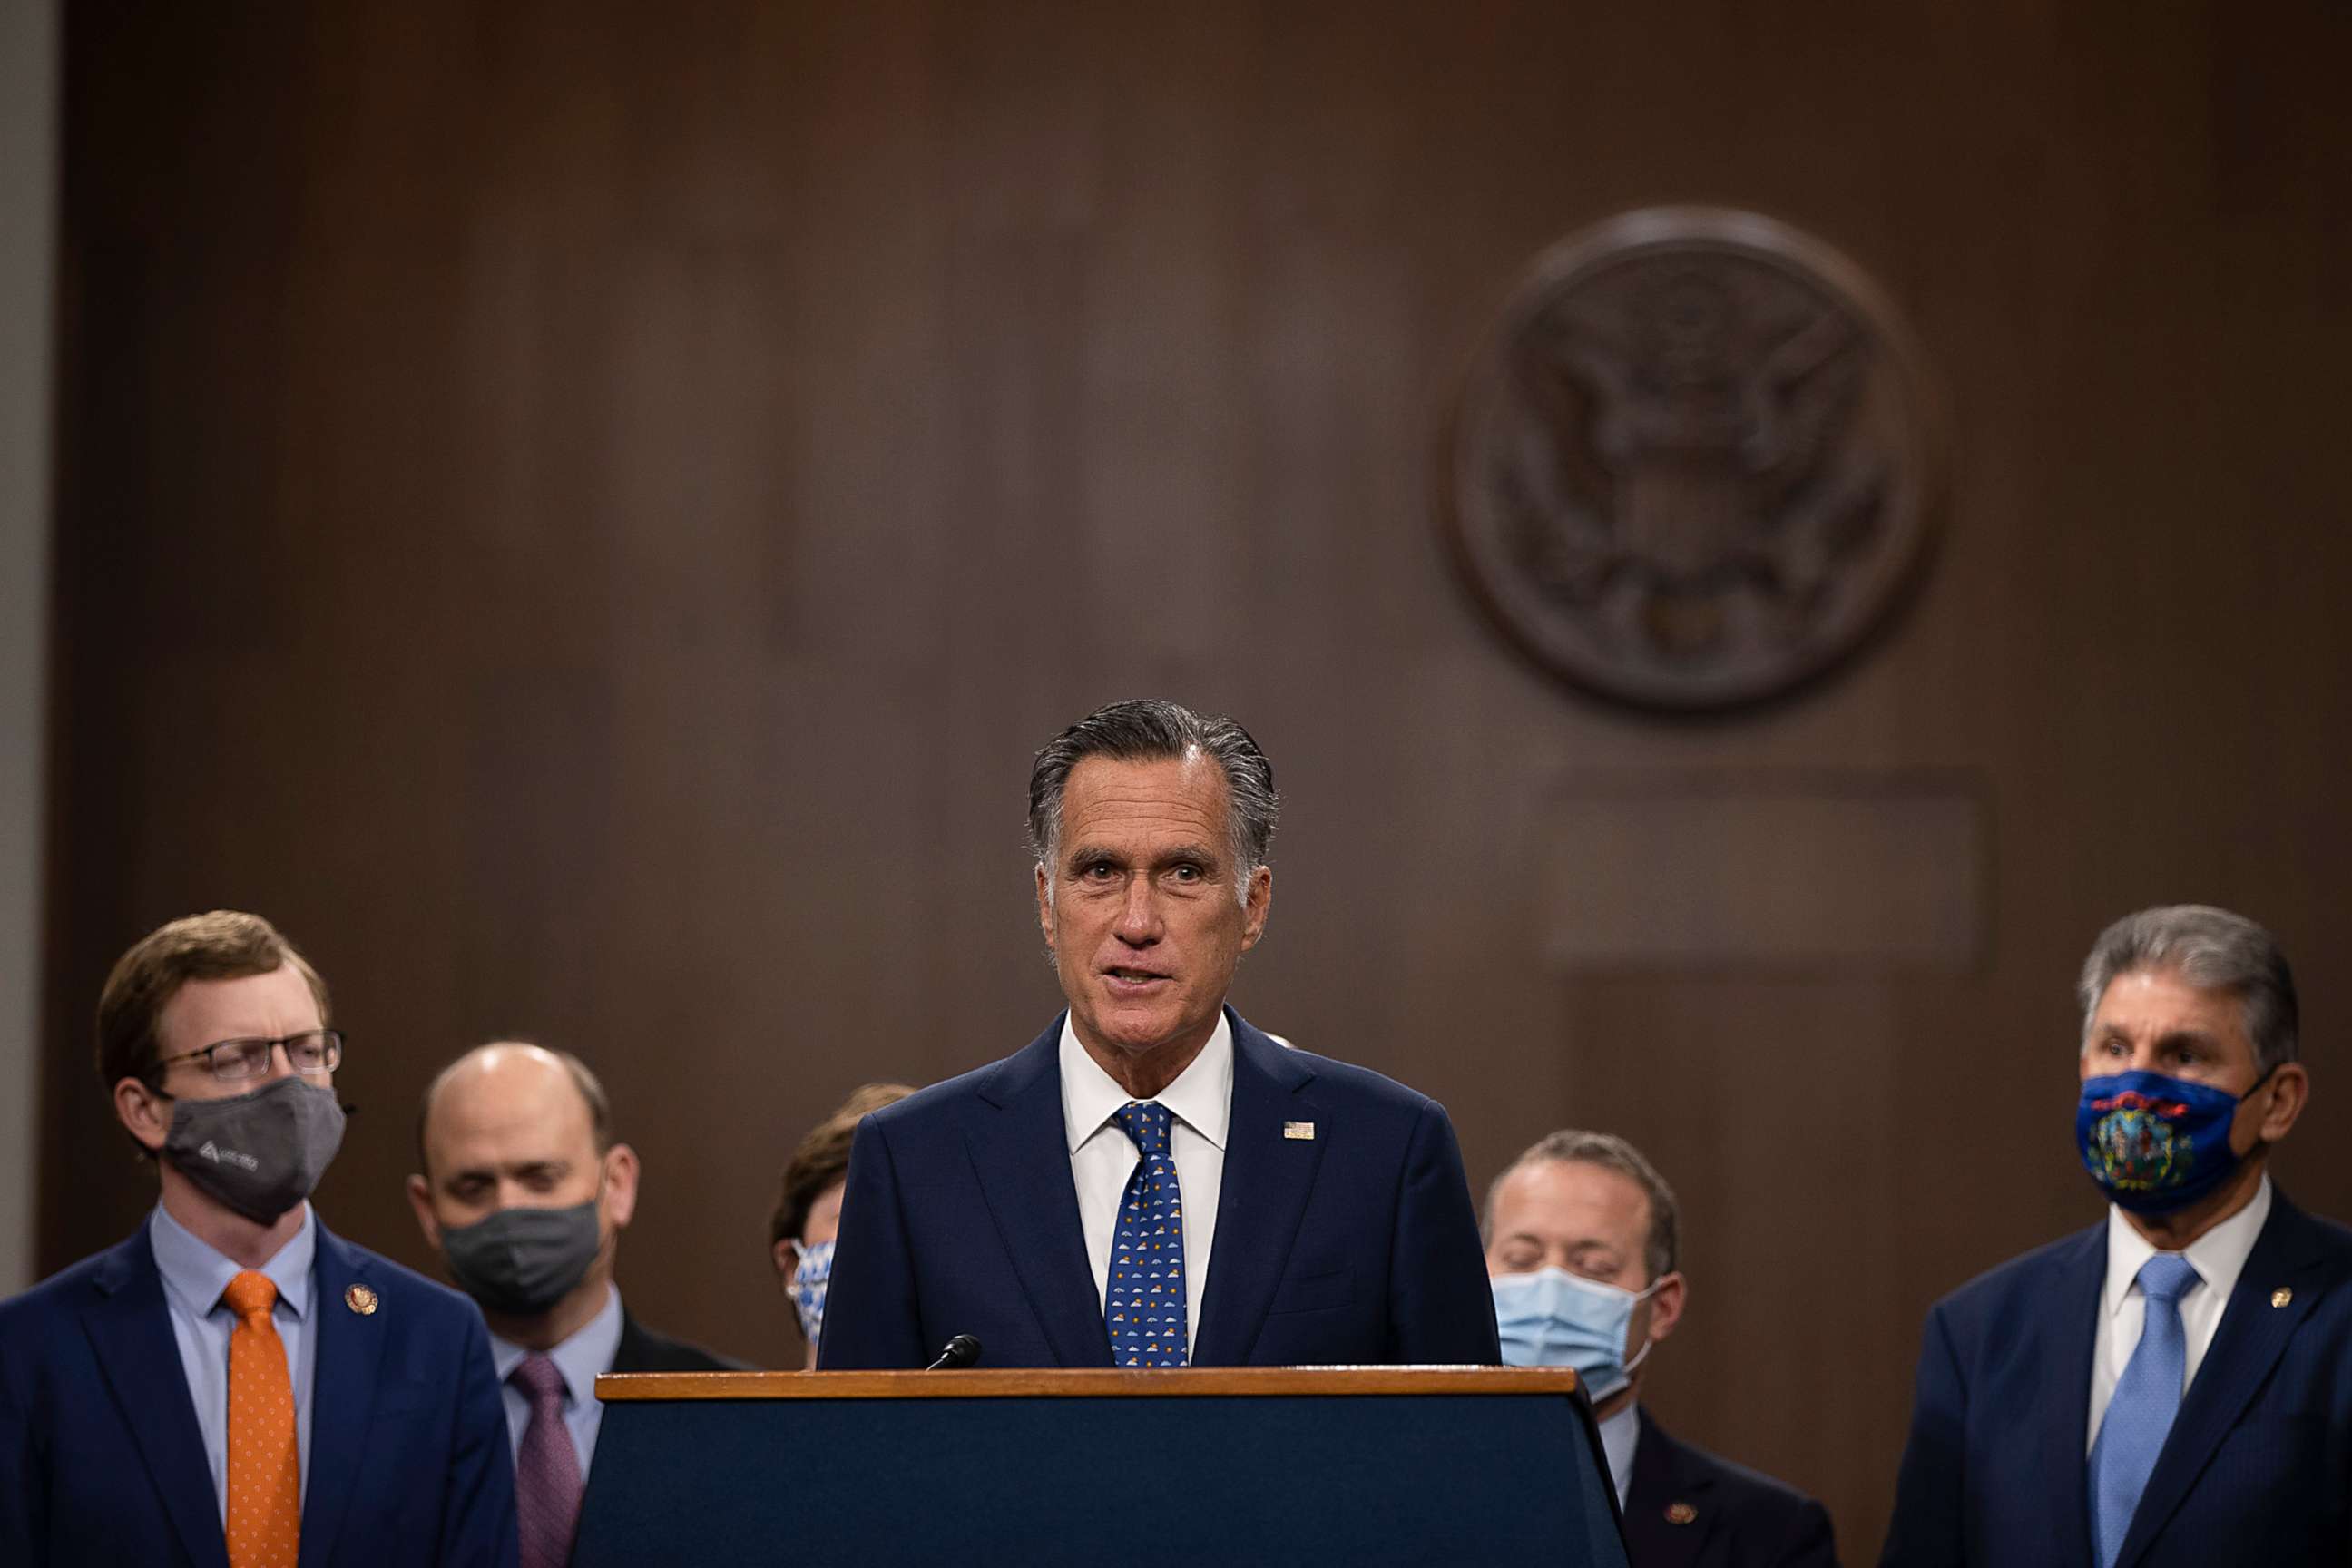 PHOTO: Sen. Mitt Romney speaks alongside a bipartisan group of Democrat and Republican members of Congress as they announce a proposal for a Covid-19 relief bill on Capitol Hill on Dec. 1, 2020, in Washington, DC.